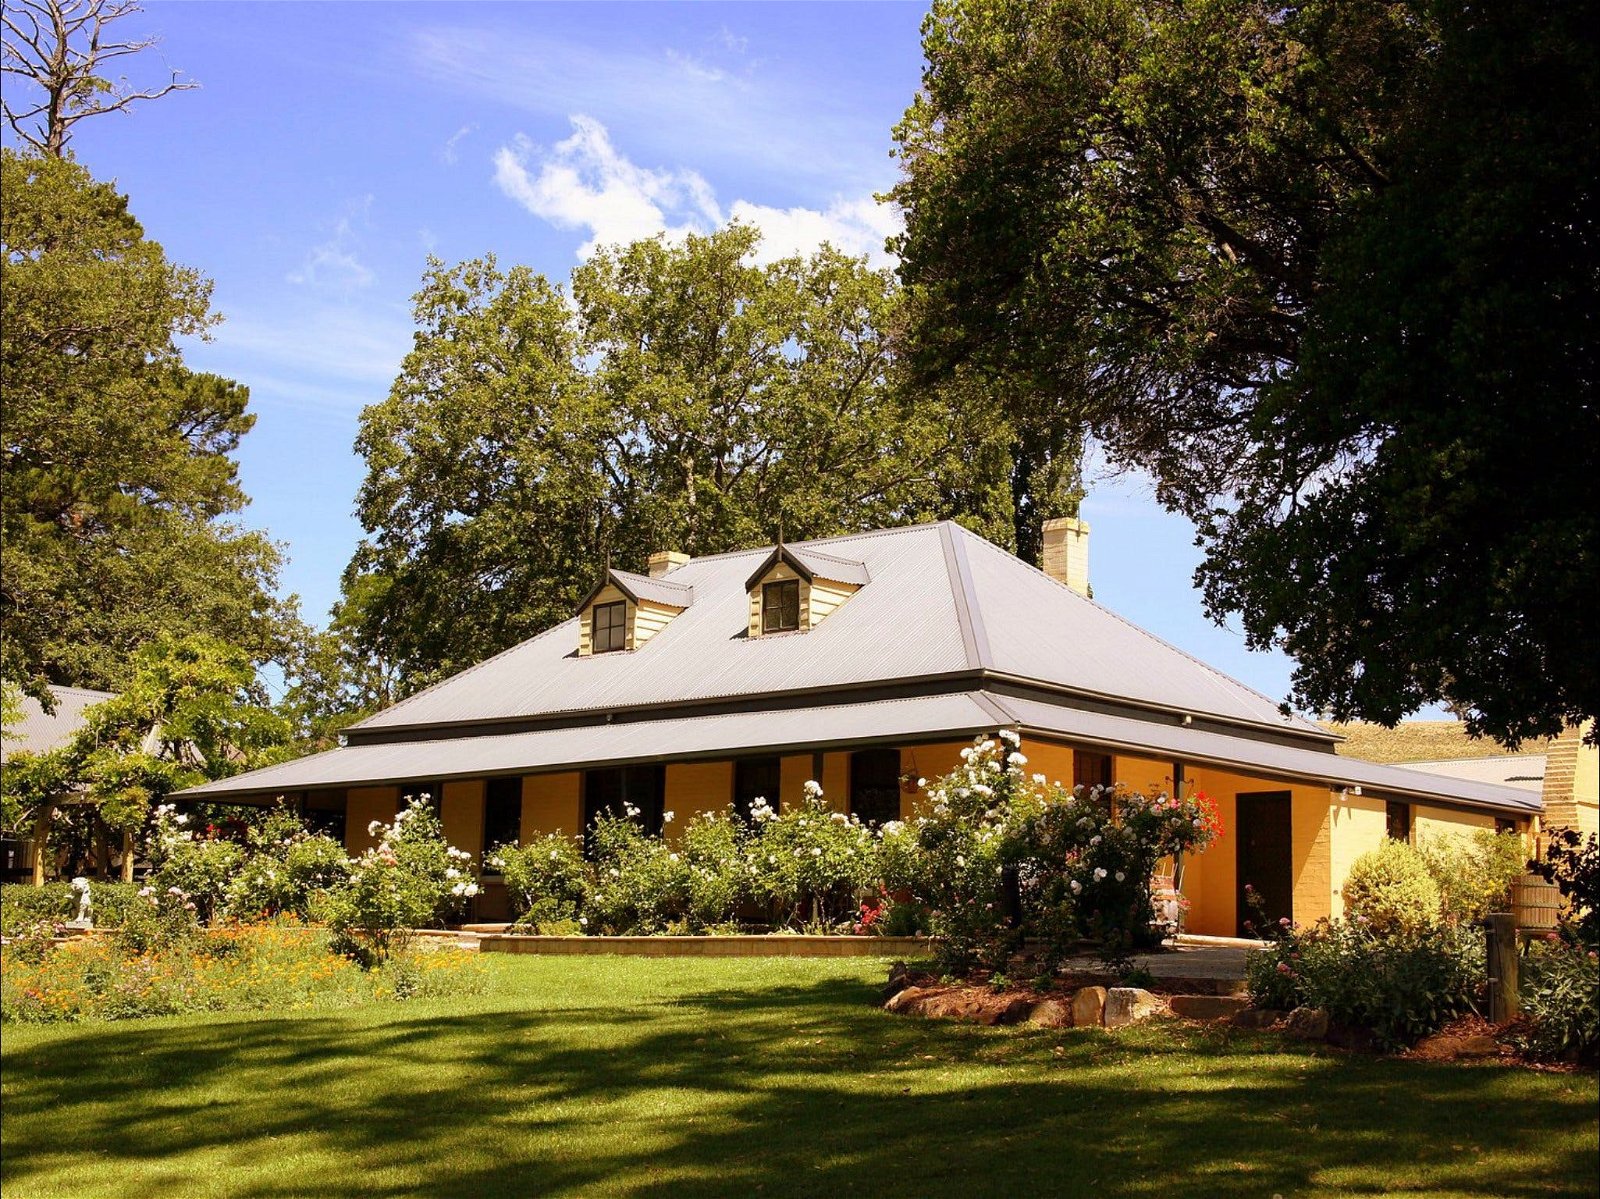 Eling Forest Cellar Door and Cafe - Northern Rivers Accommodation